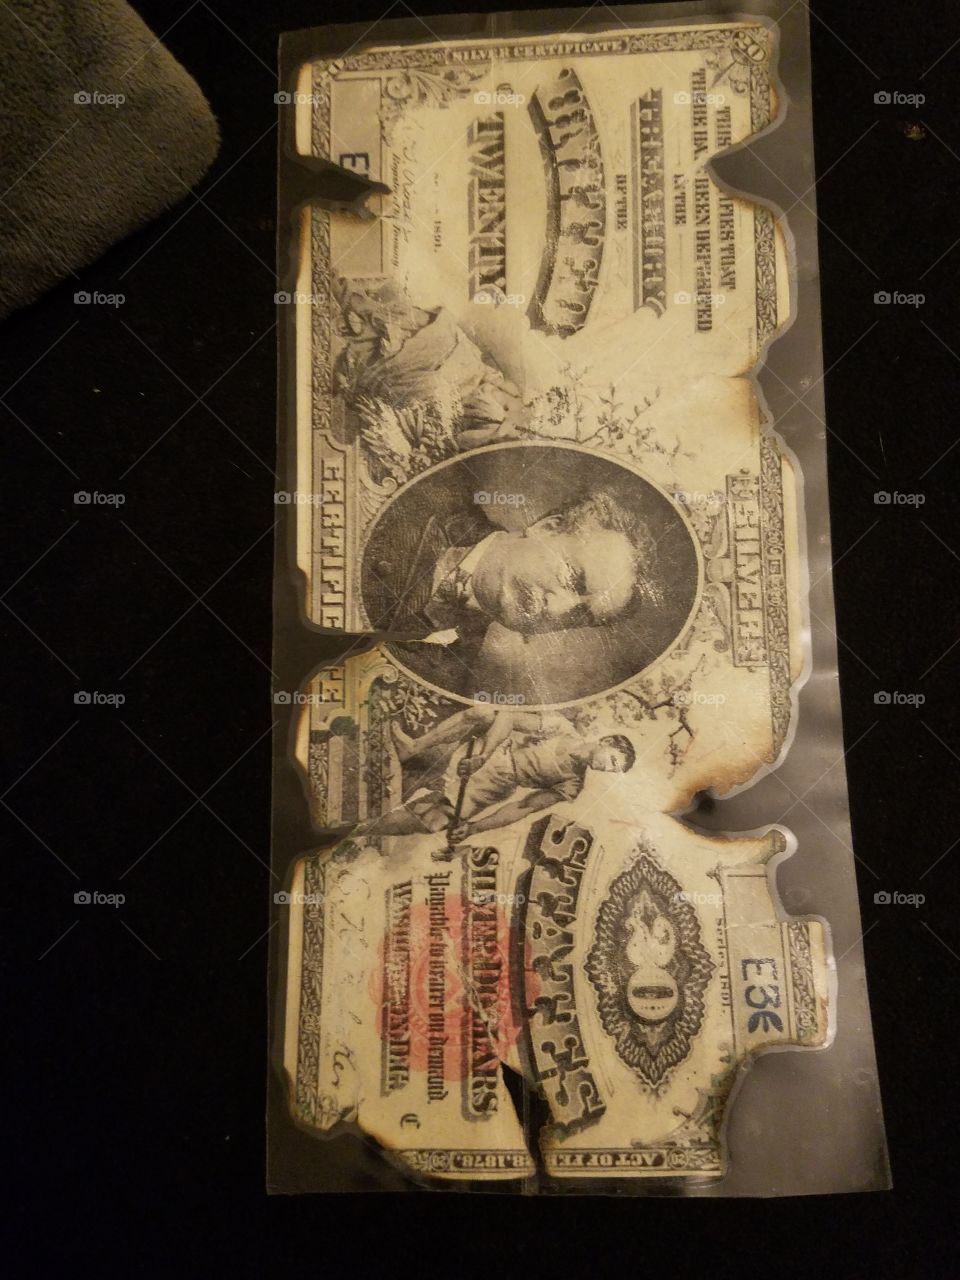 1891 U.S. banknote $20 Silver Certificate saved from the heart of the flames